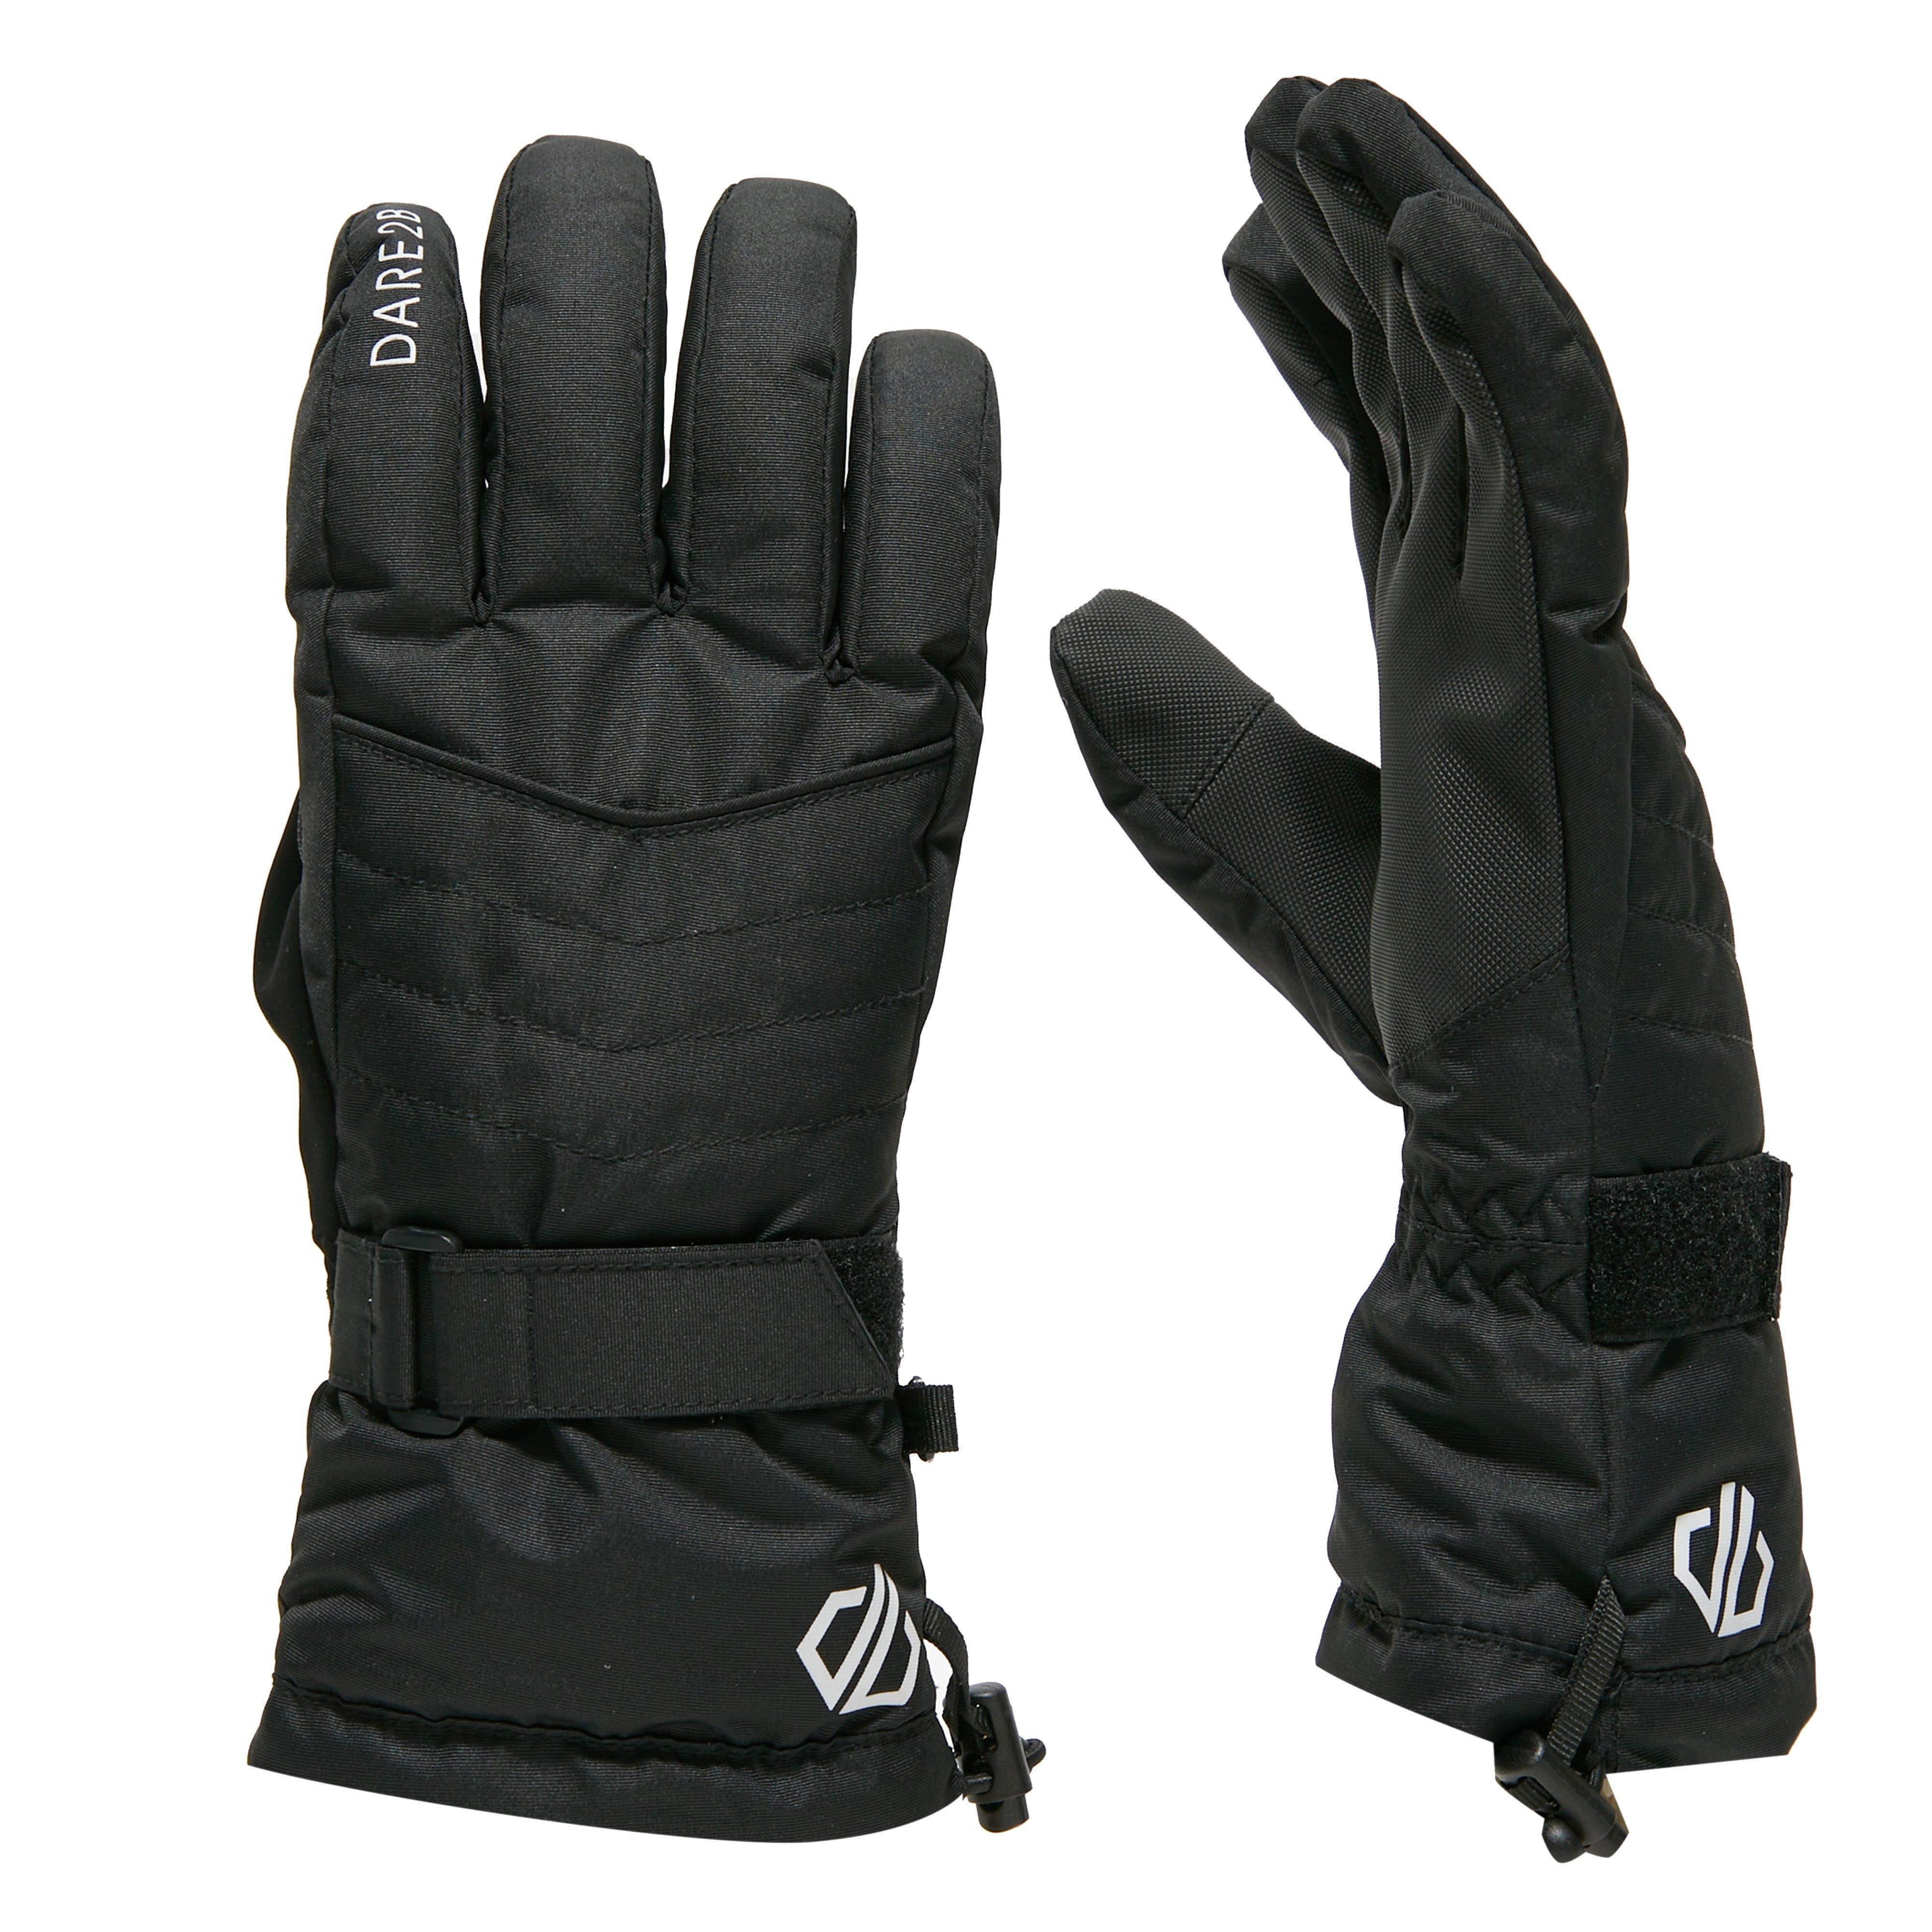 Dare 2B Women's Acute Gloves Review